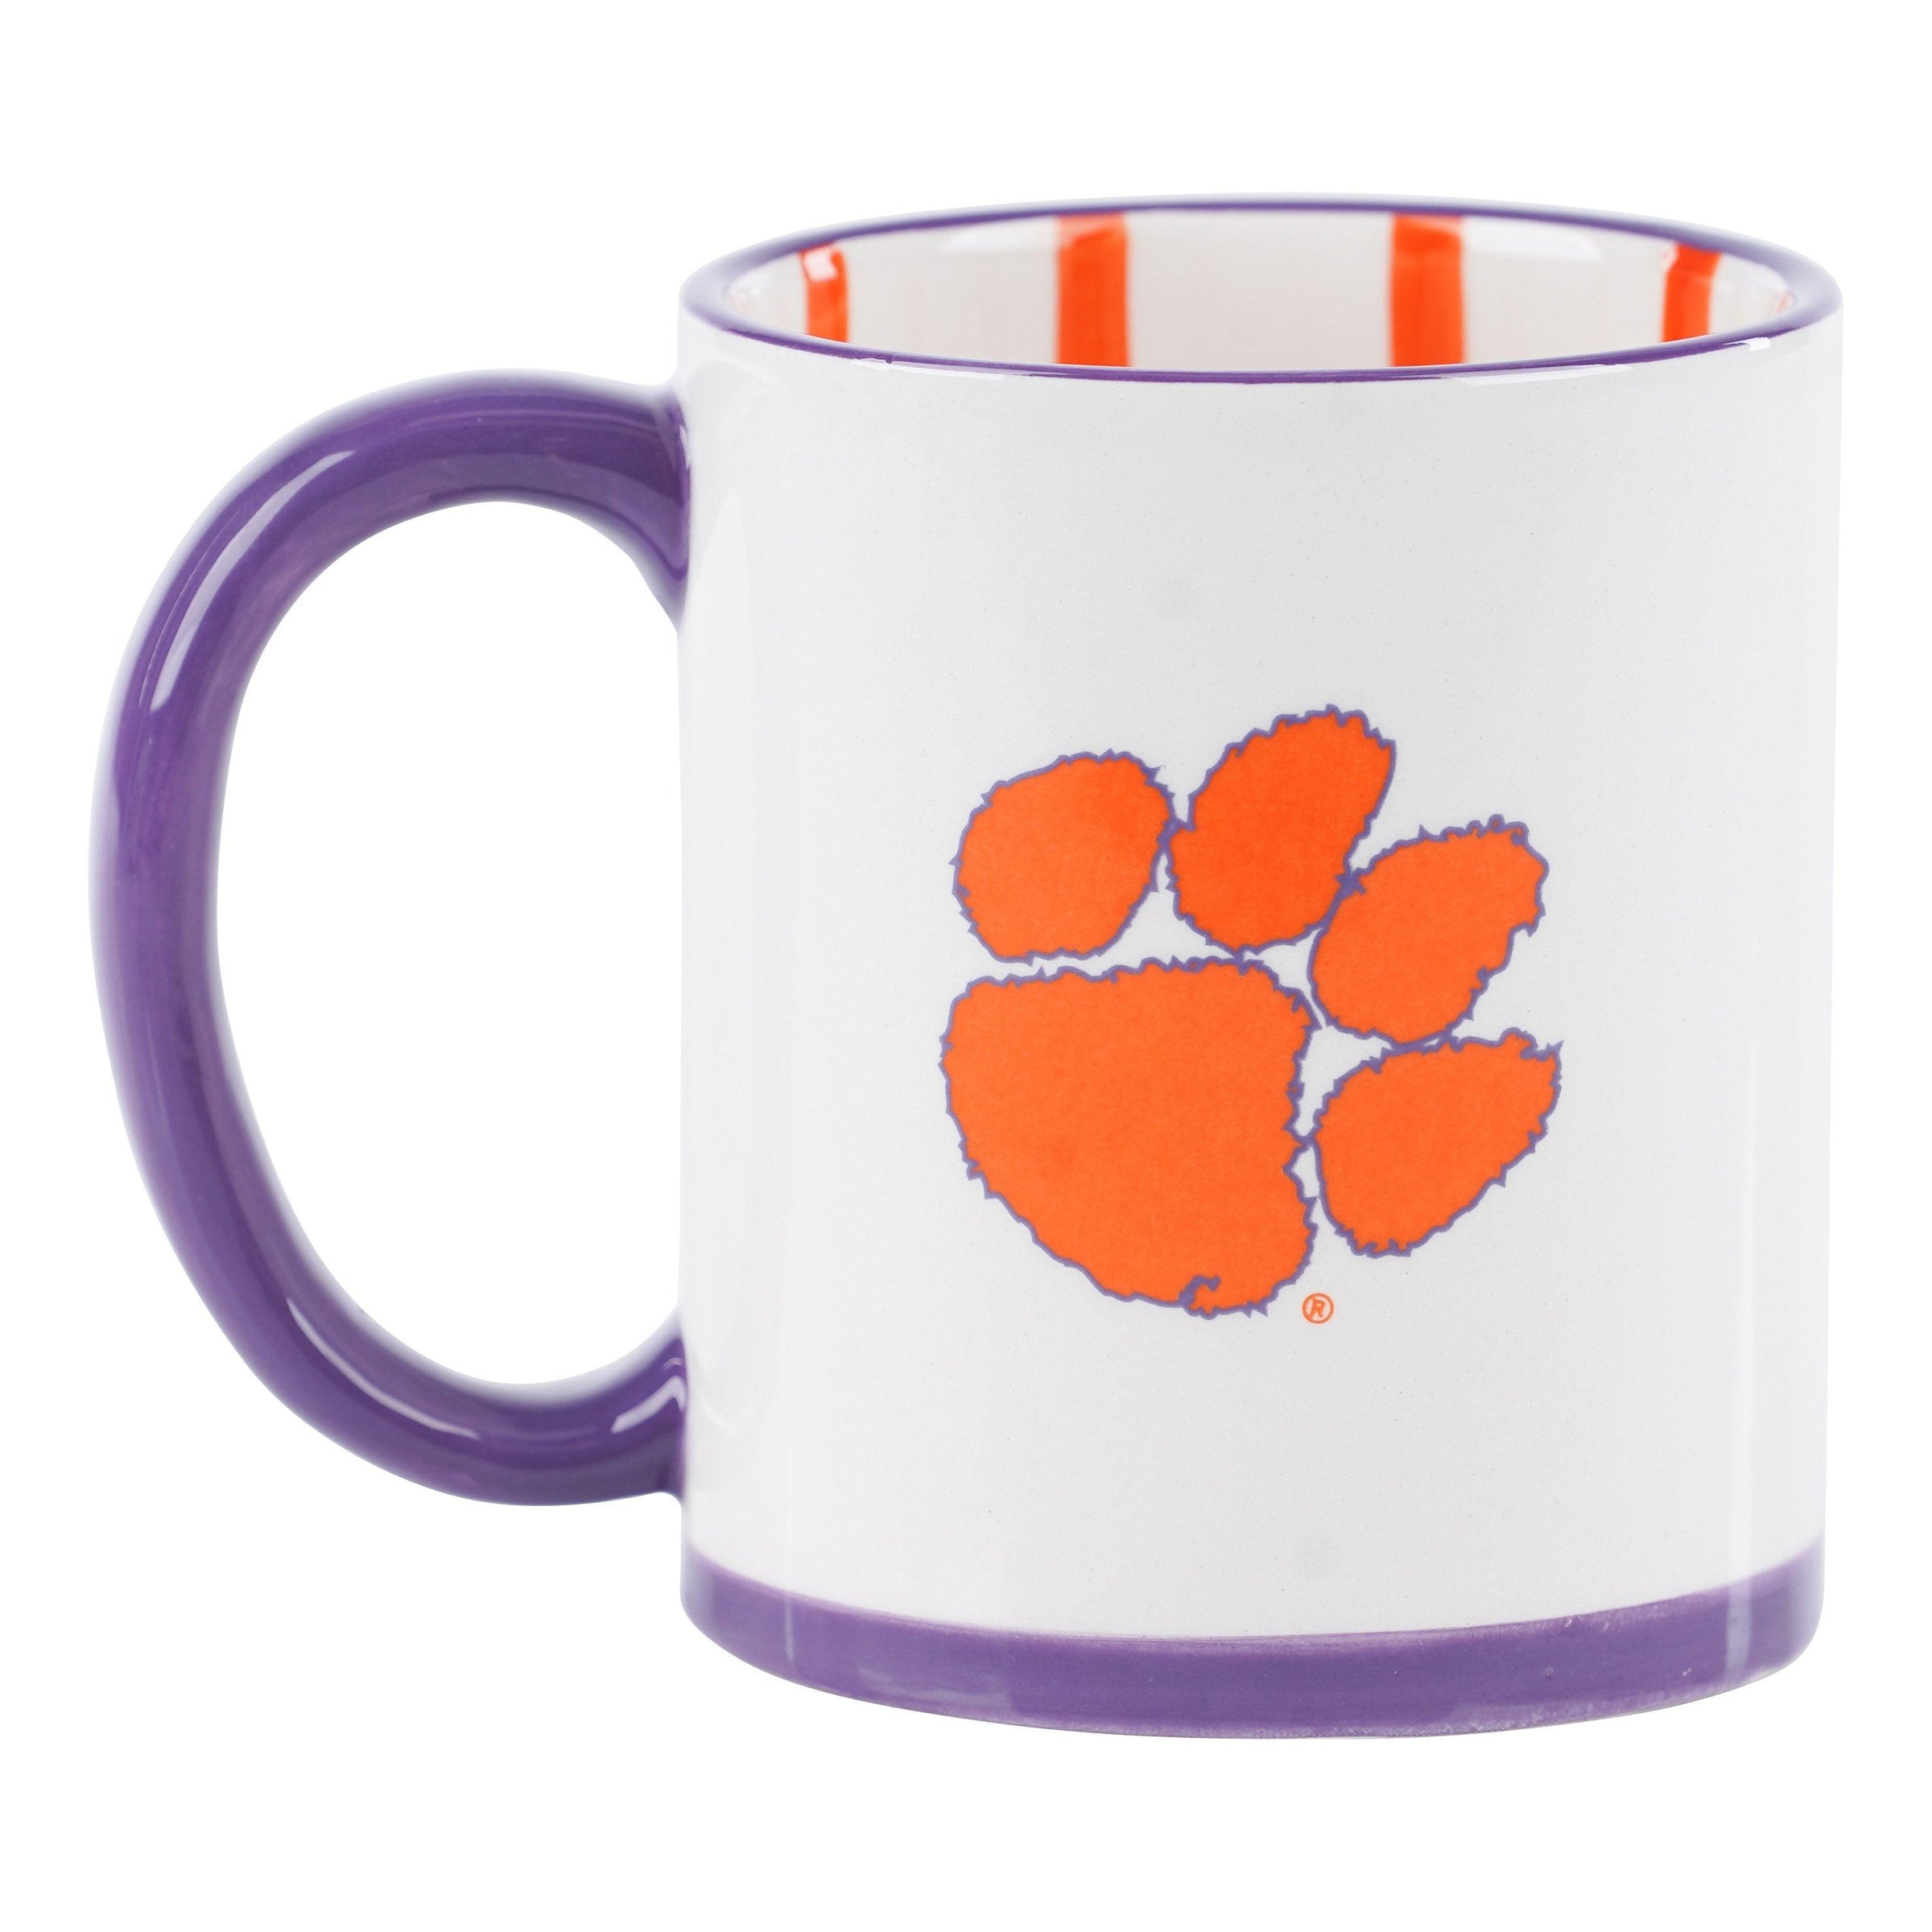 Simple Modern Clemson Tigers Insulated Drinkware Scout Coffee Mugs 2-Pack